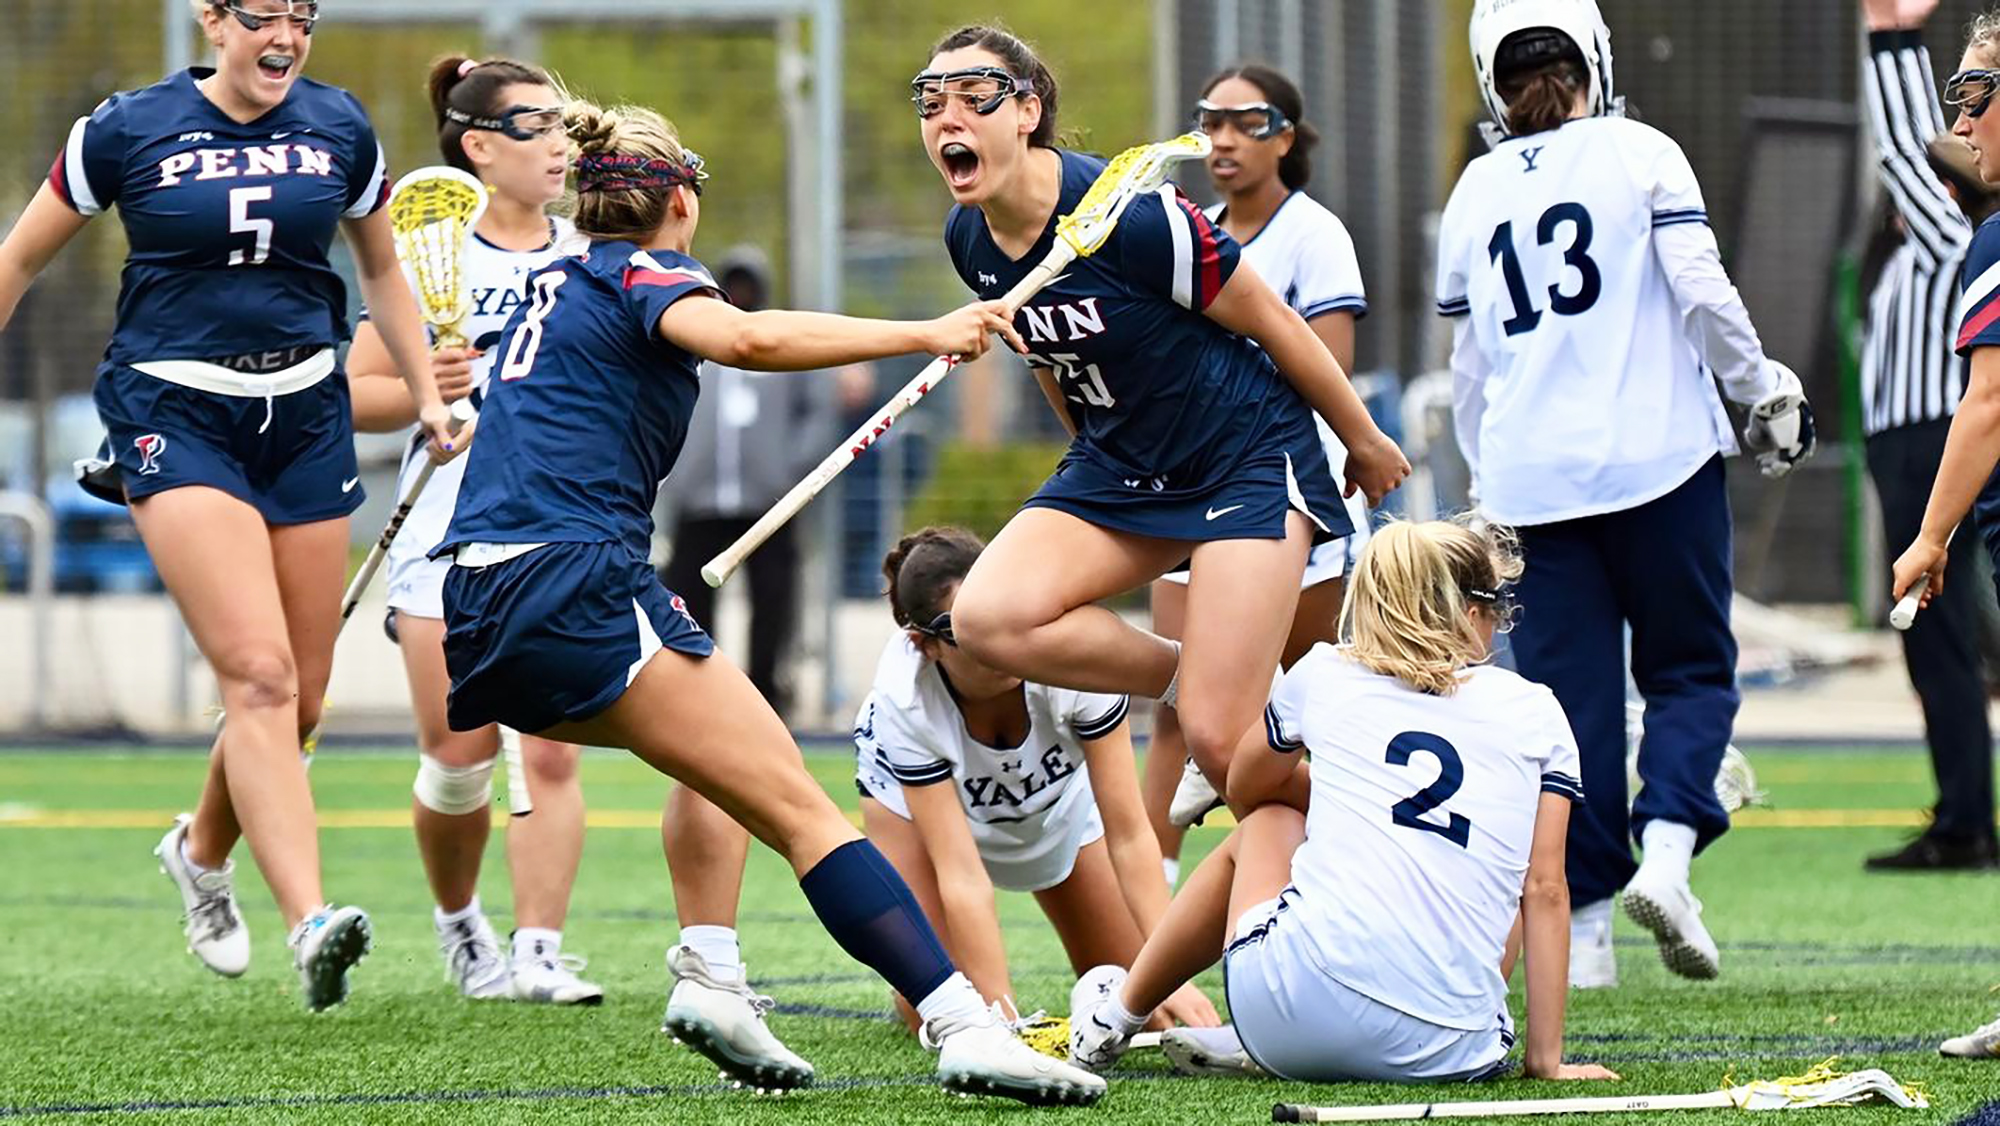 Players on the women's lacrosse team celebrate after scoring a goal against Yale.